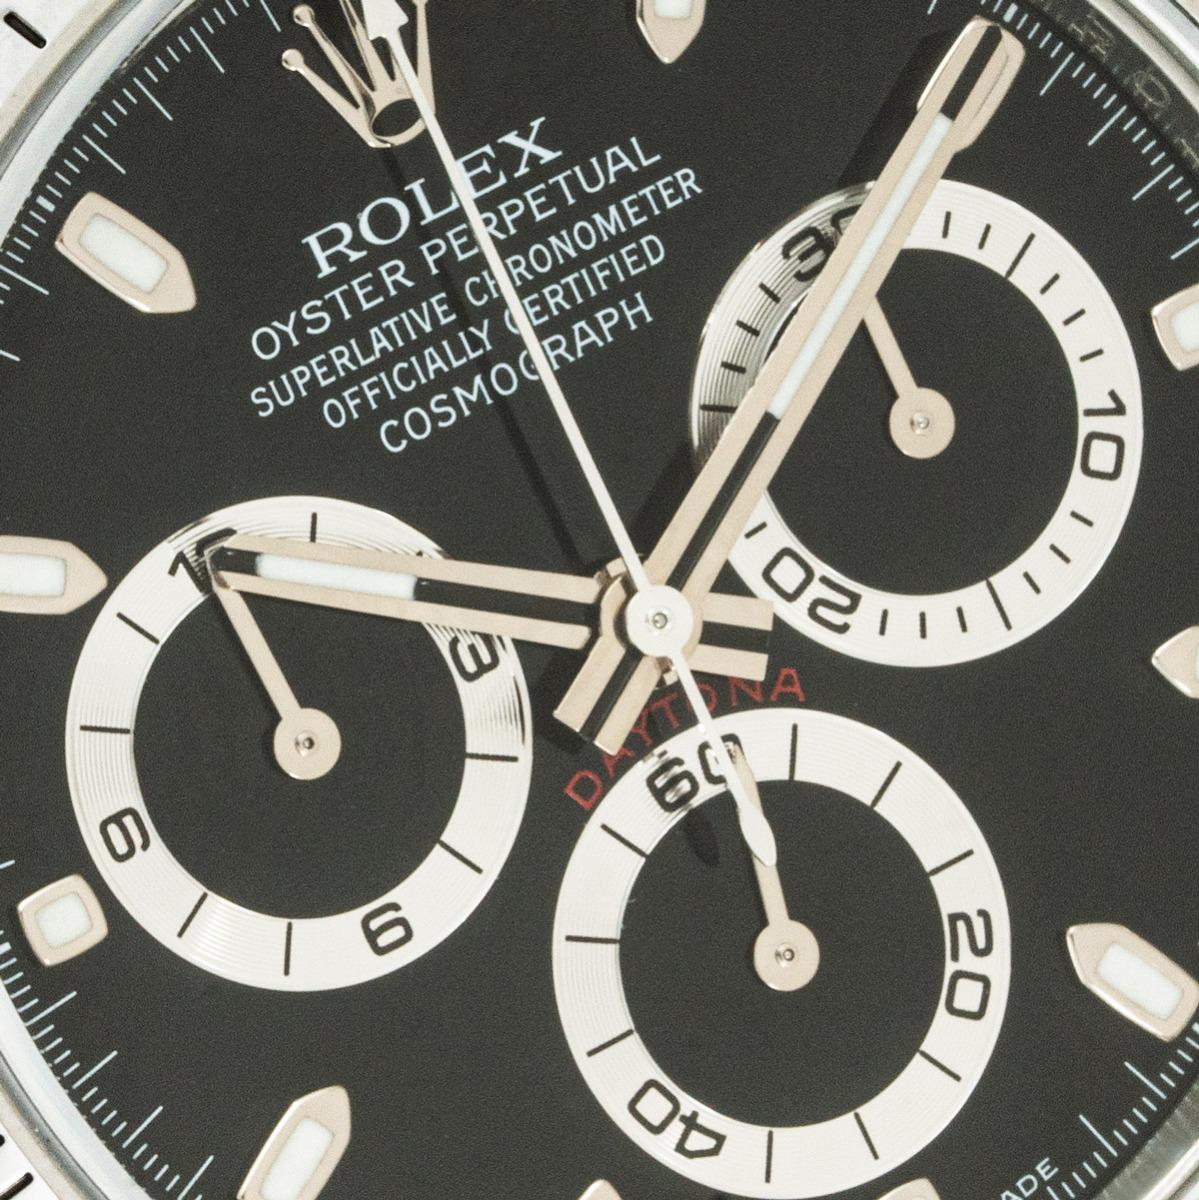 Rolex Daytona Black Dial 116520 In Excellent Condition For Sale In London, GB